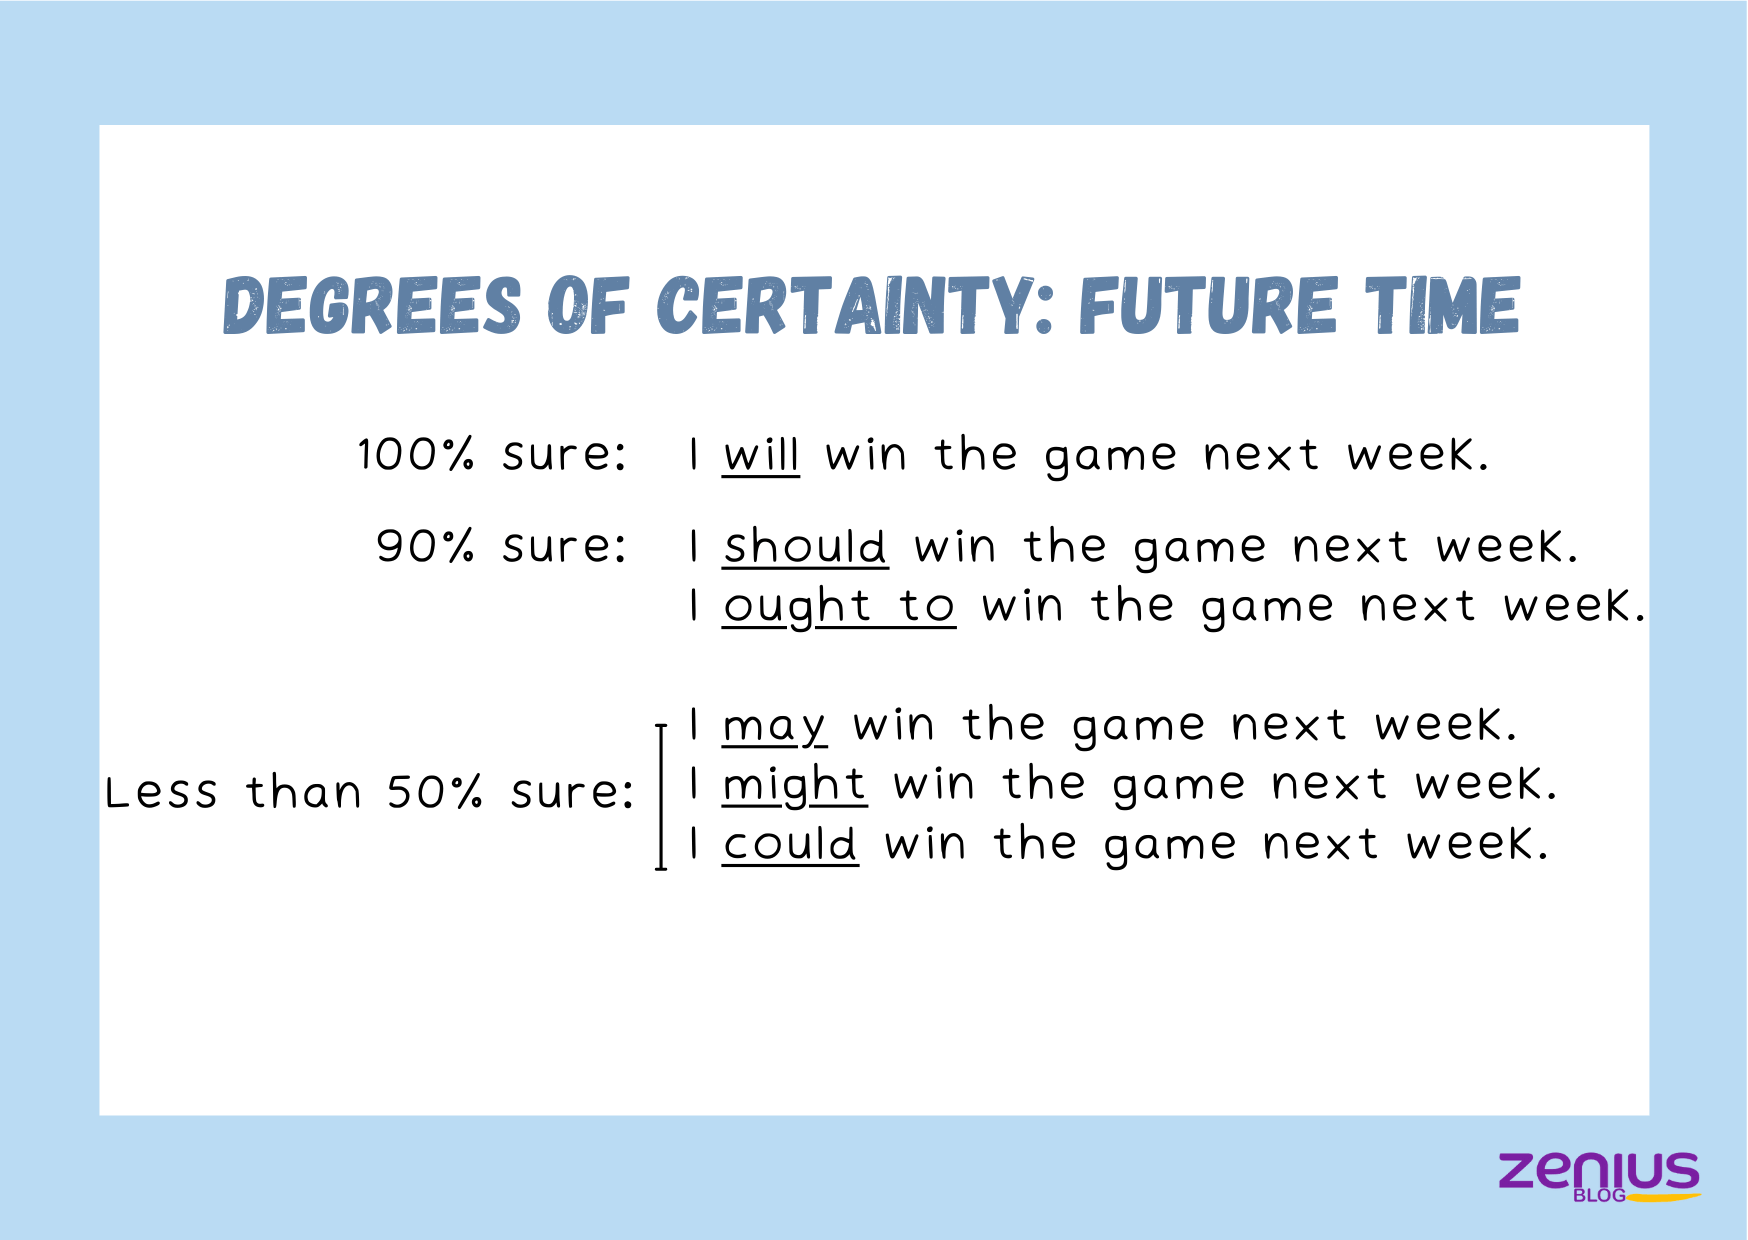 Making Prediction Degrees of Certainty Future Time Zenius